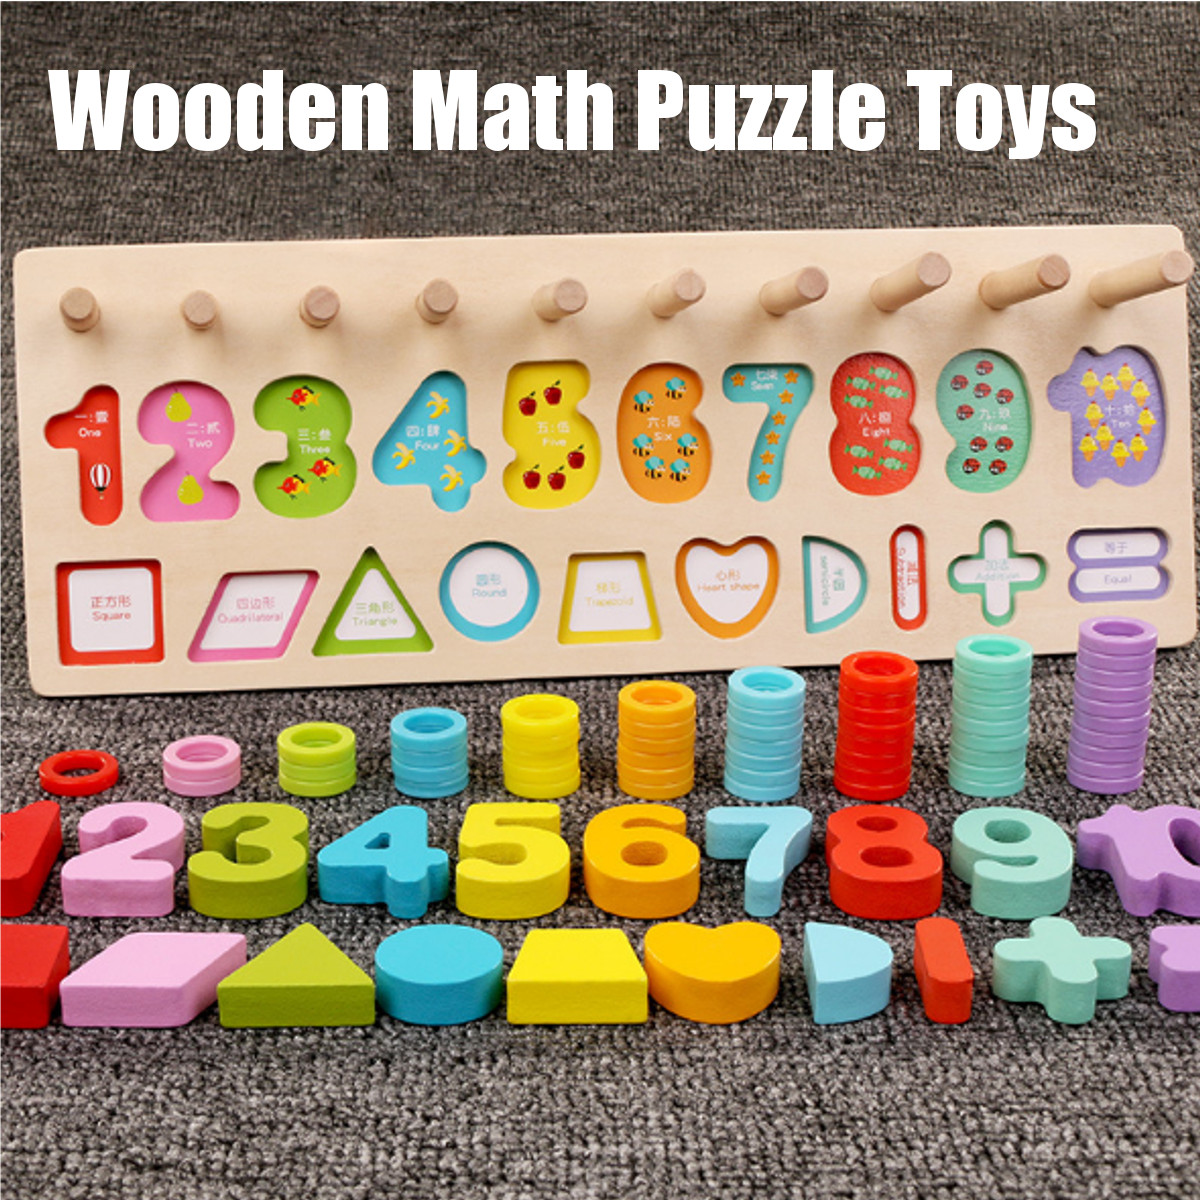 Kids-Wooden-Math-Puzzle-Toys-Numbers-Learning-Hand-Eye-Coordination-Educational-Games-1665813-2